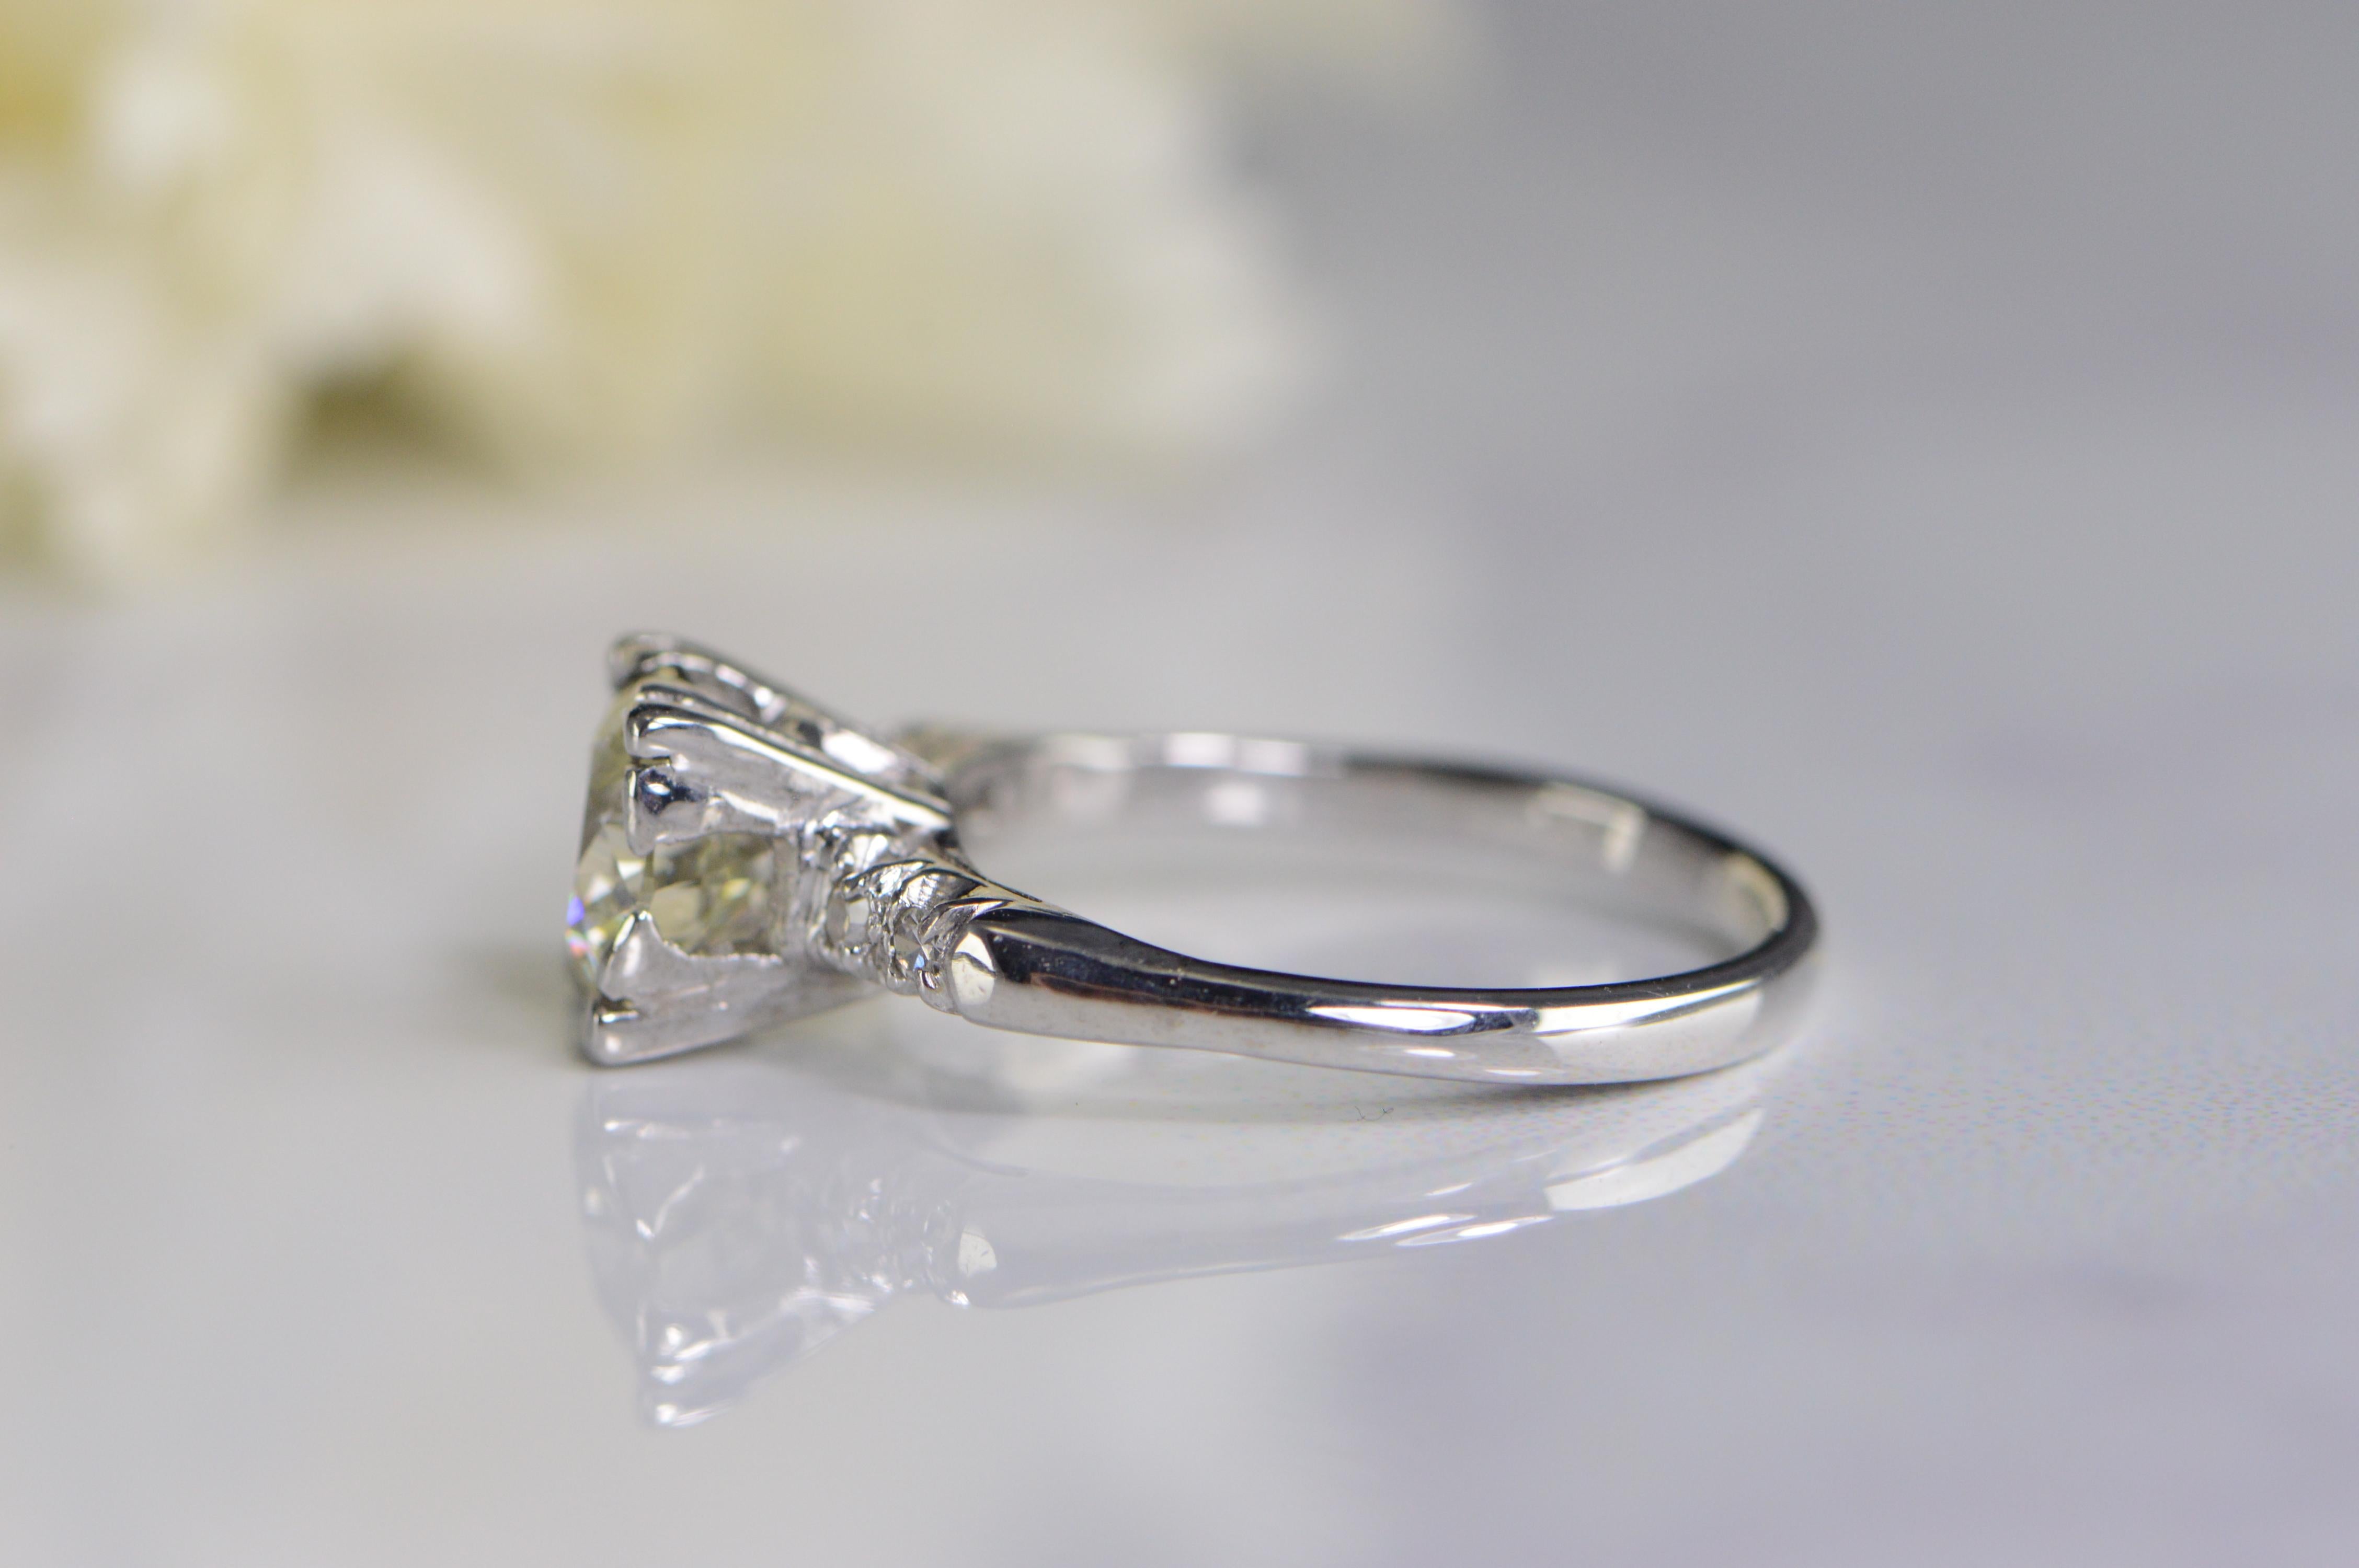 1940s 1.58 Carat Platinum Diamond Engagement Ring In Excellent Condition For Sale In Frederick, MD